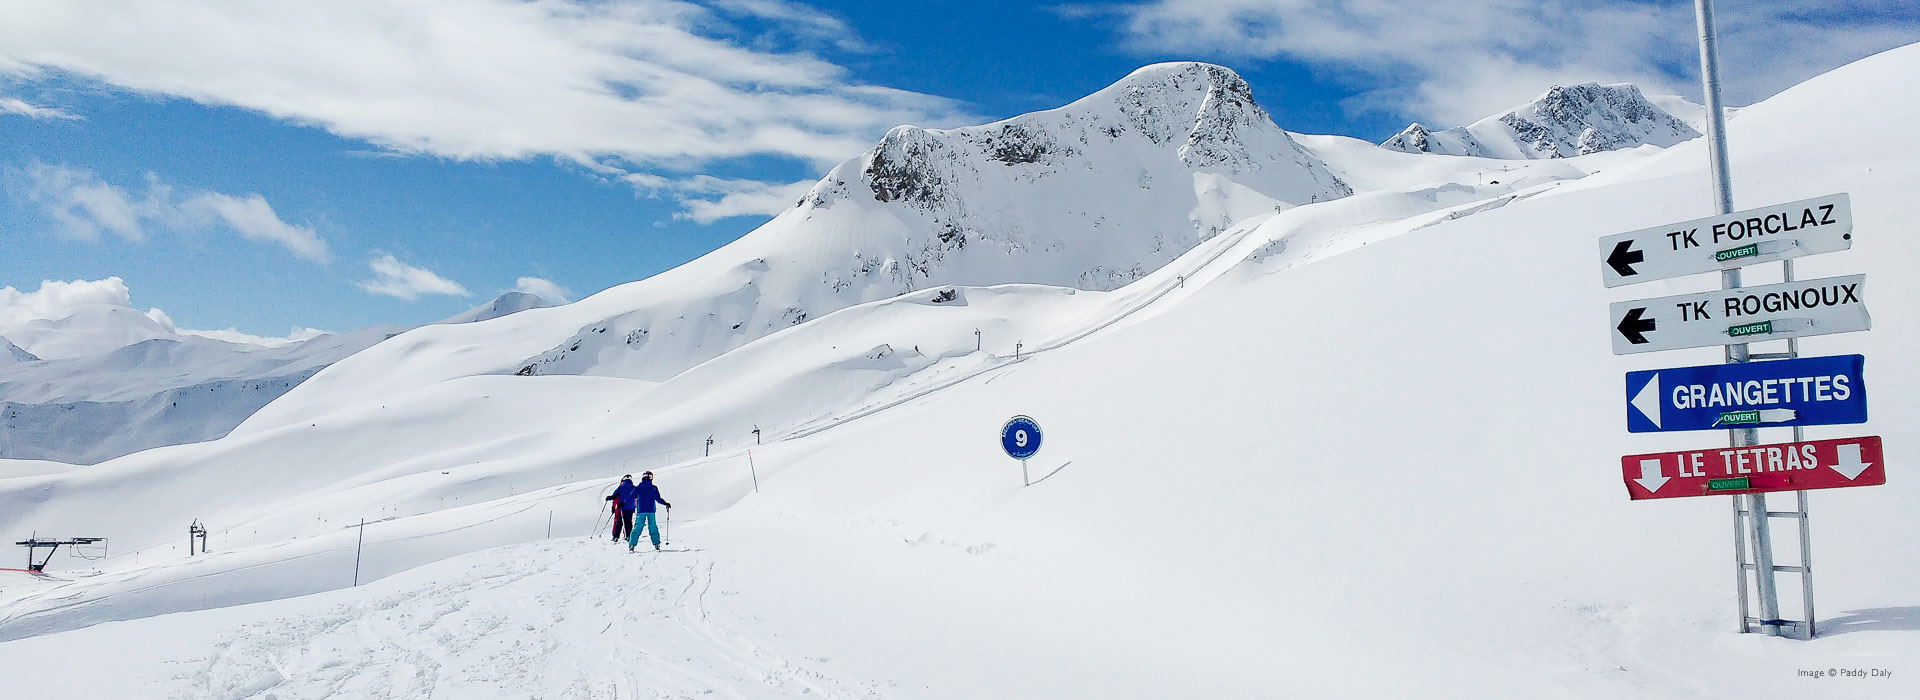 Two skiers on fresh snow in Areches-Beaufort, French Alps